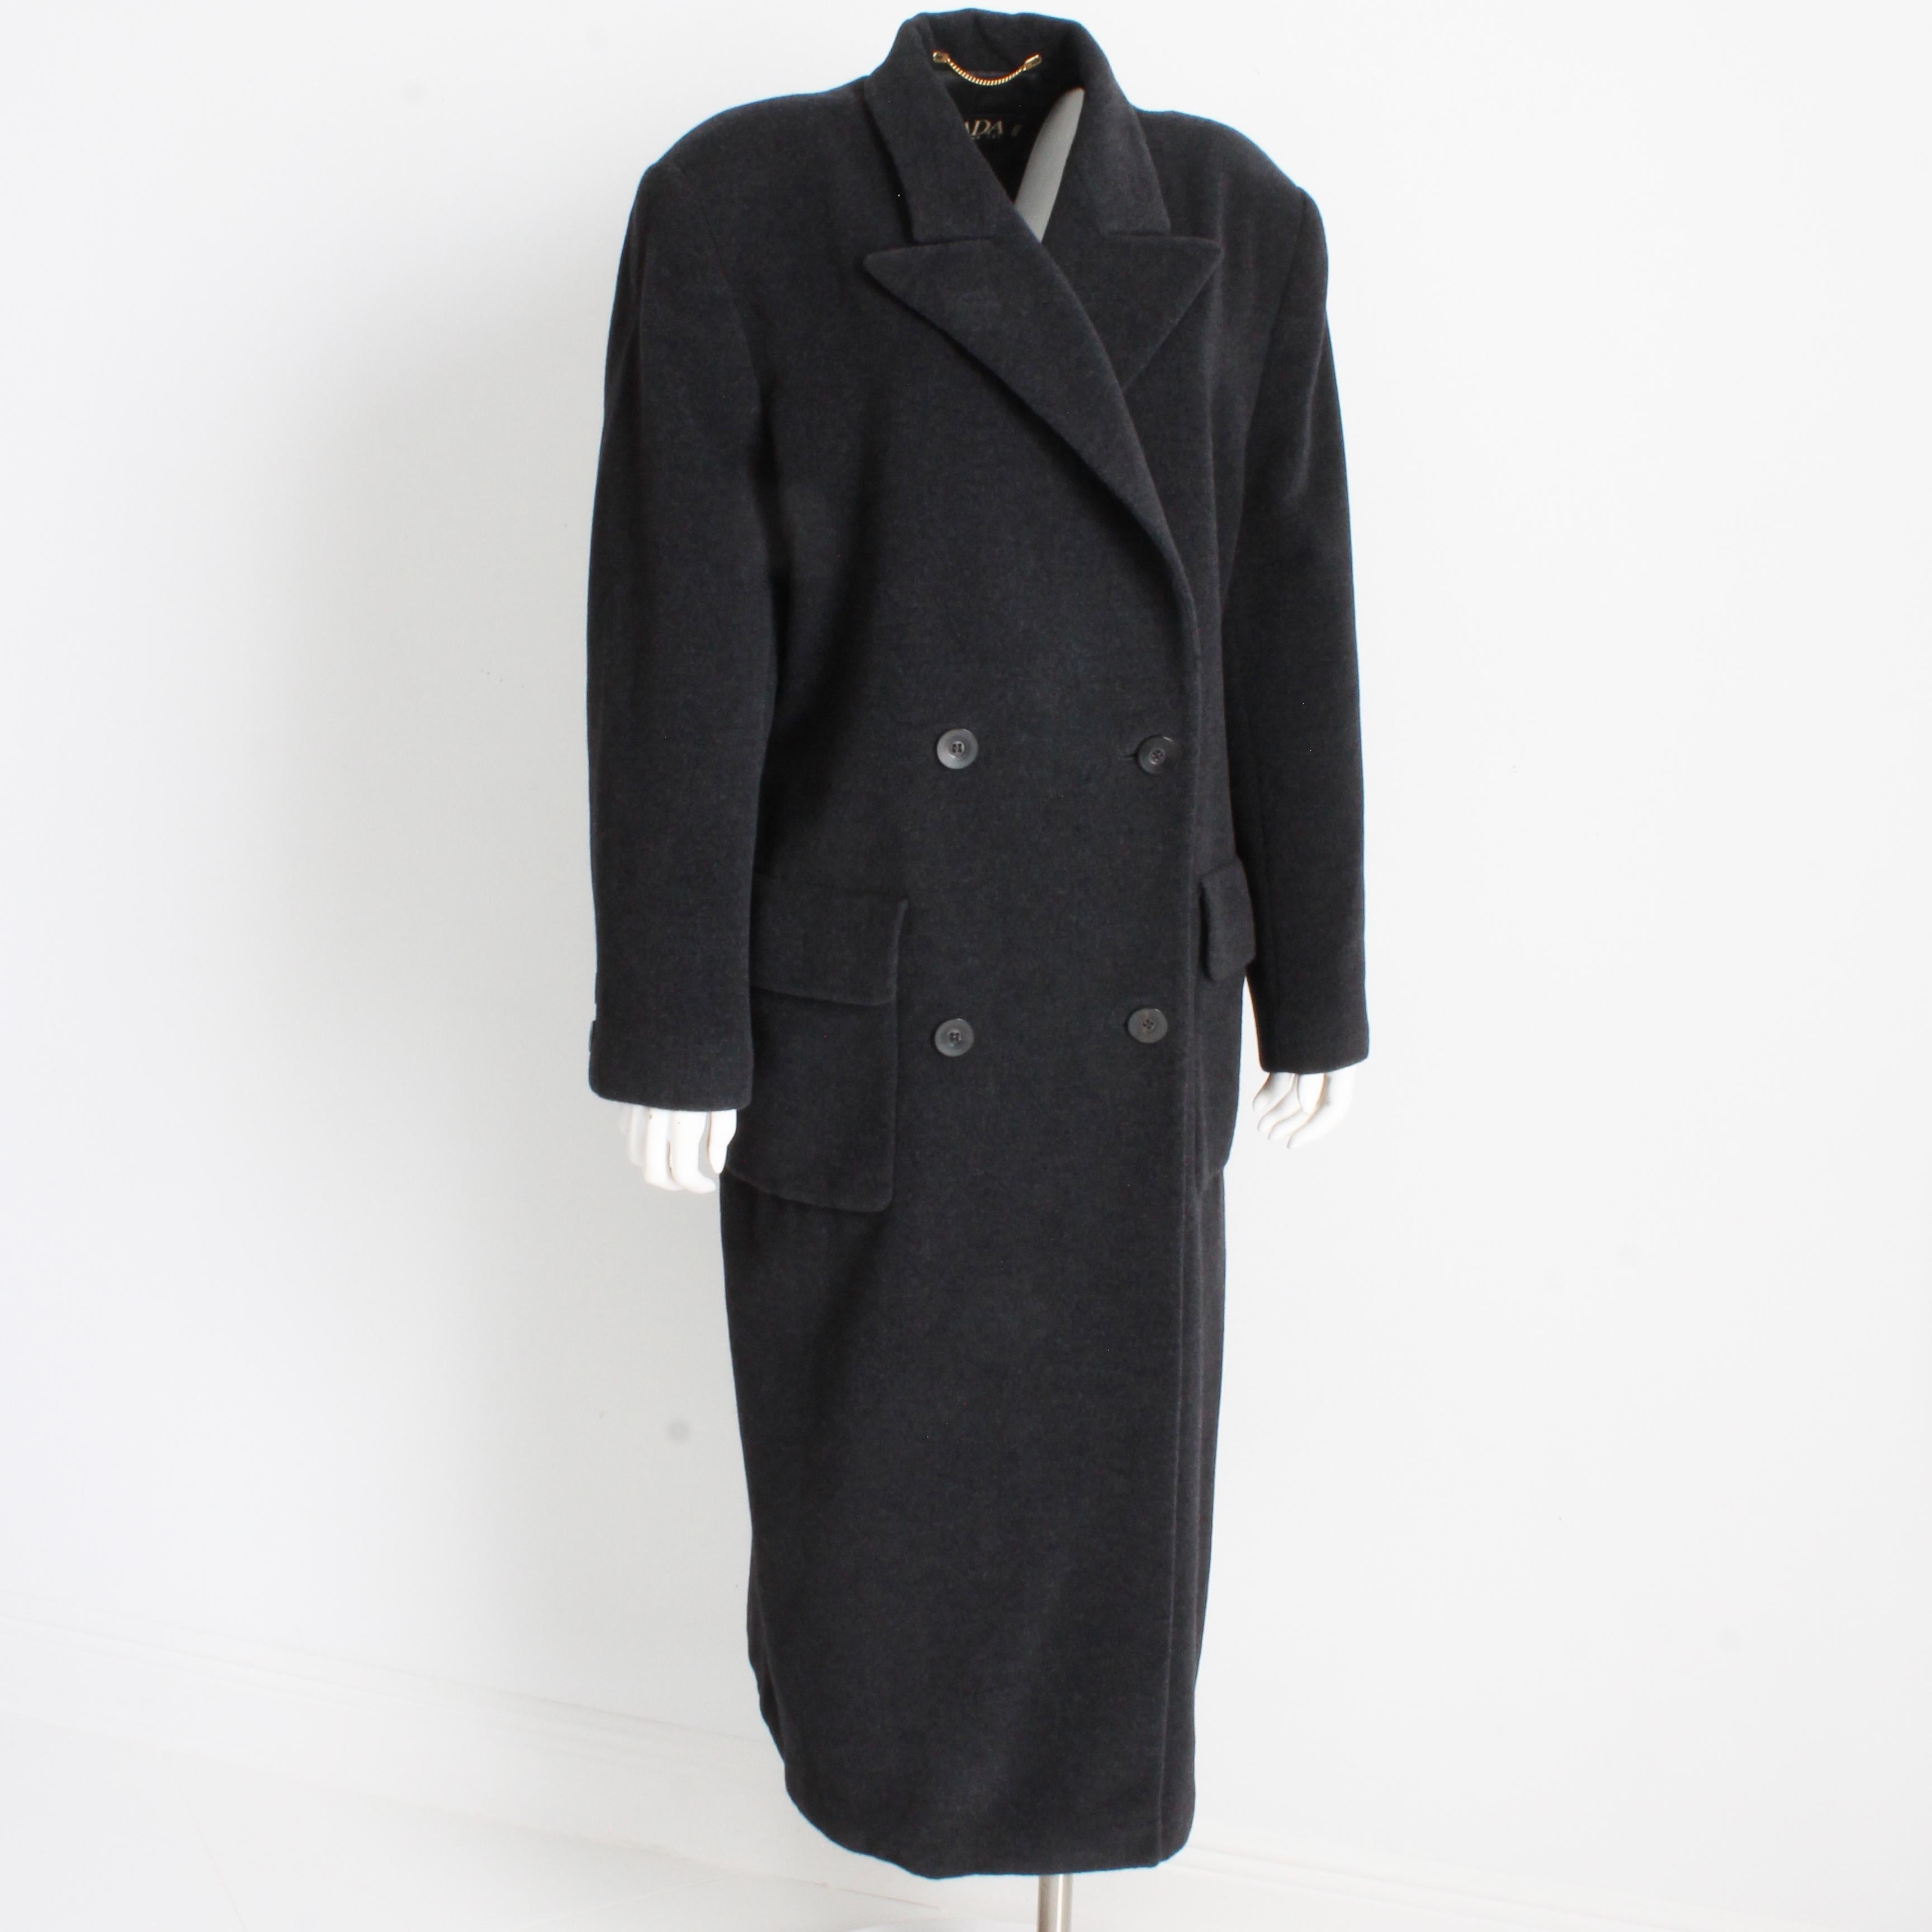 Escada Coat Double Breasted Charcoal Gray Pure New Wool Trench Style Vintage M/L For Sale 5